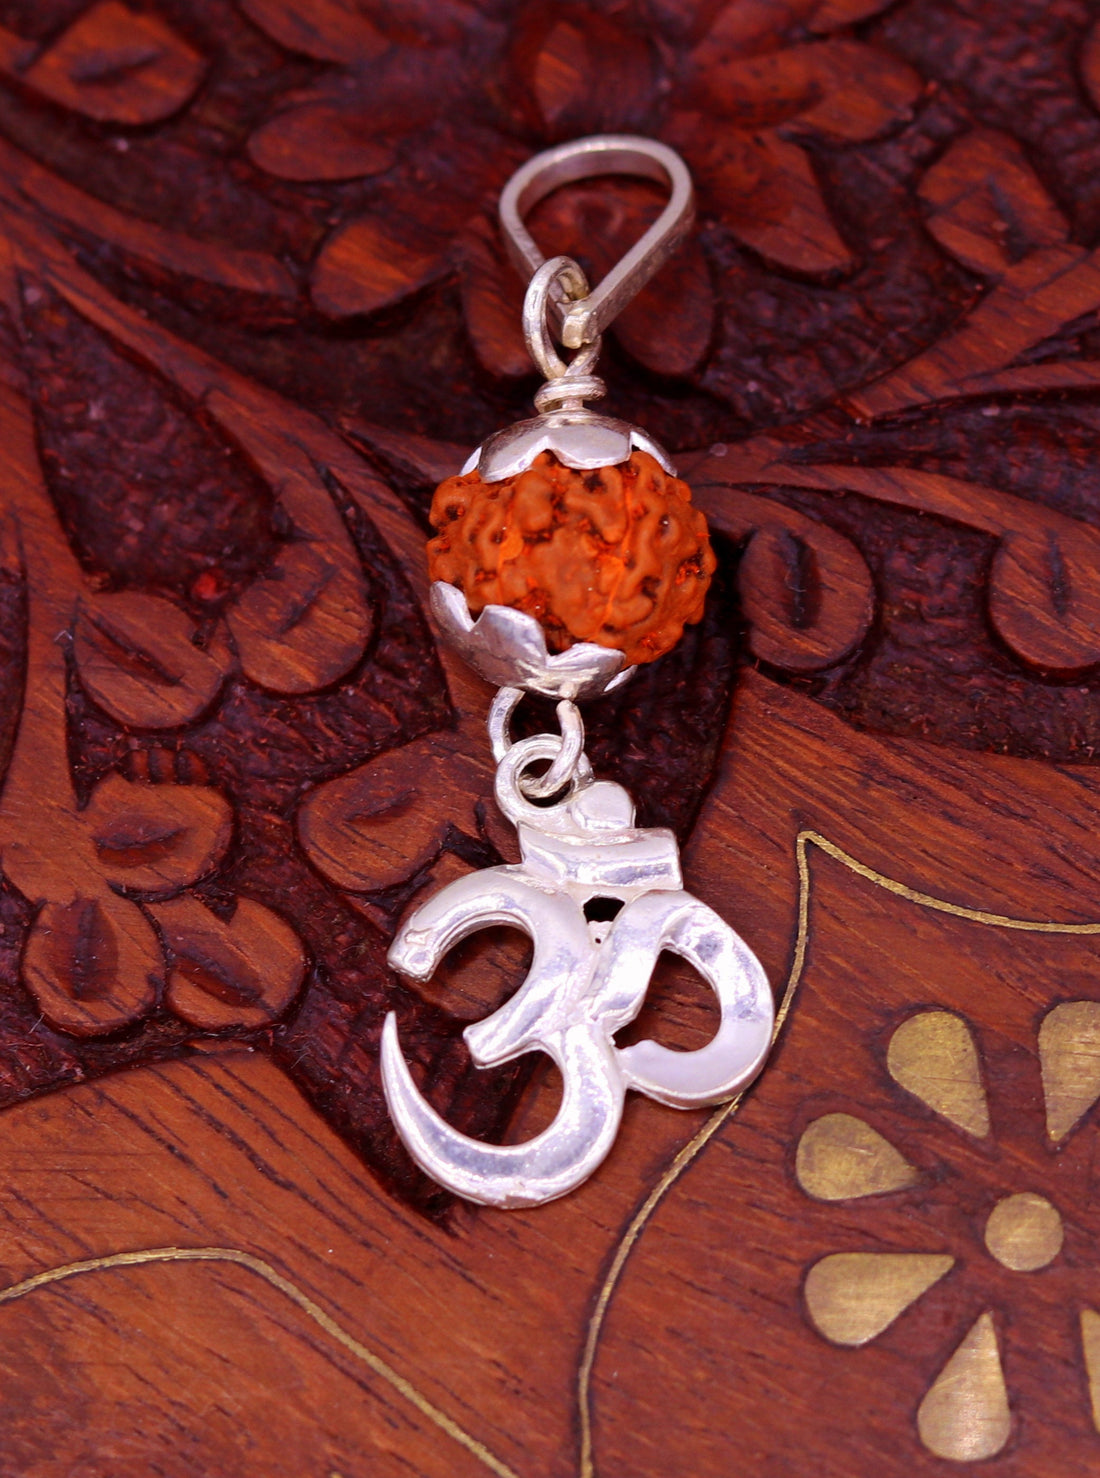 Sterling silver Handmade Aum mantra pendant with fabulous natural rudraksha beads excellent unisex gifting light weight jewelry nsp279 - TRIBAL ORNAMENTS